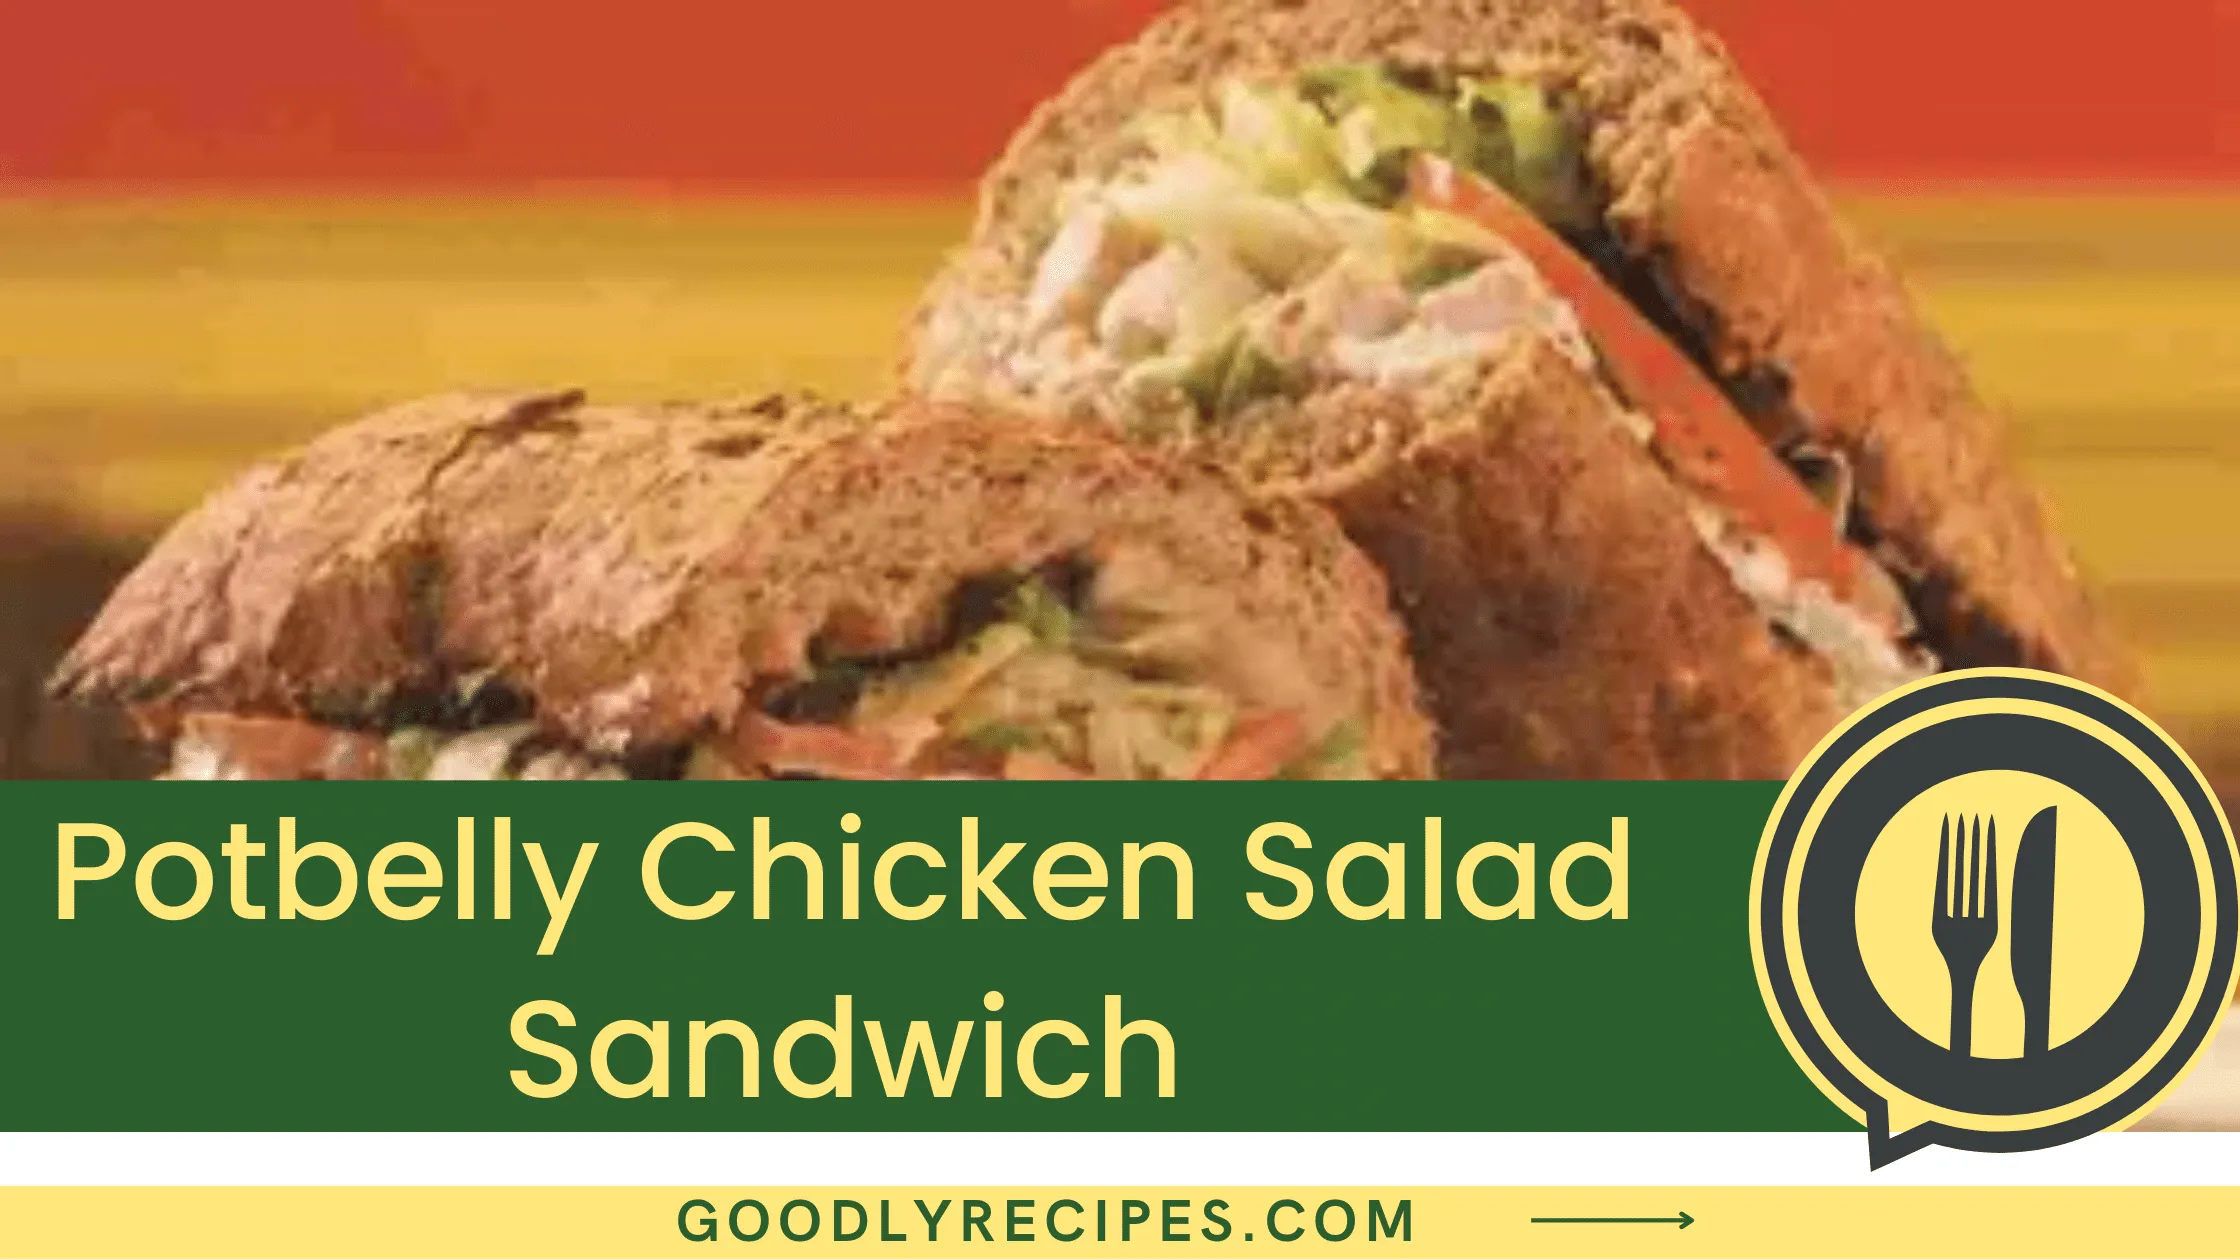 Potbelly Chicken Salad Sandwich Recipe - For Food Lovers